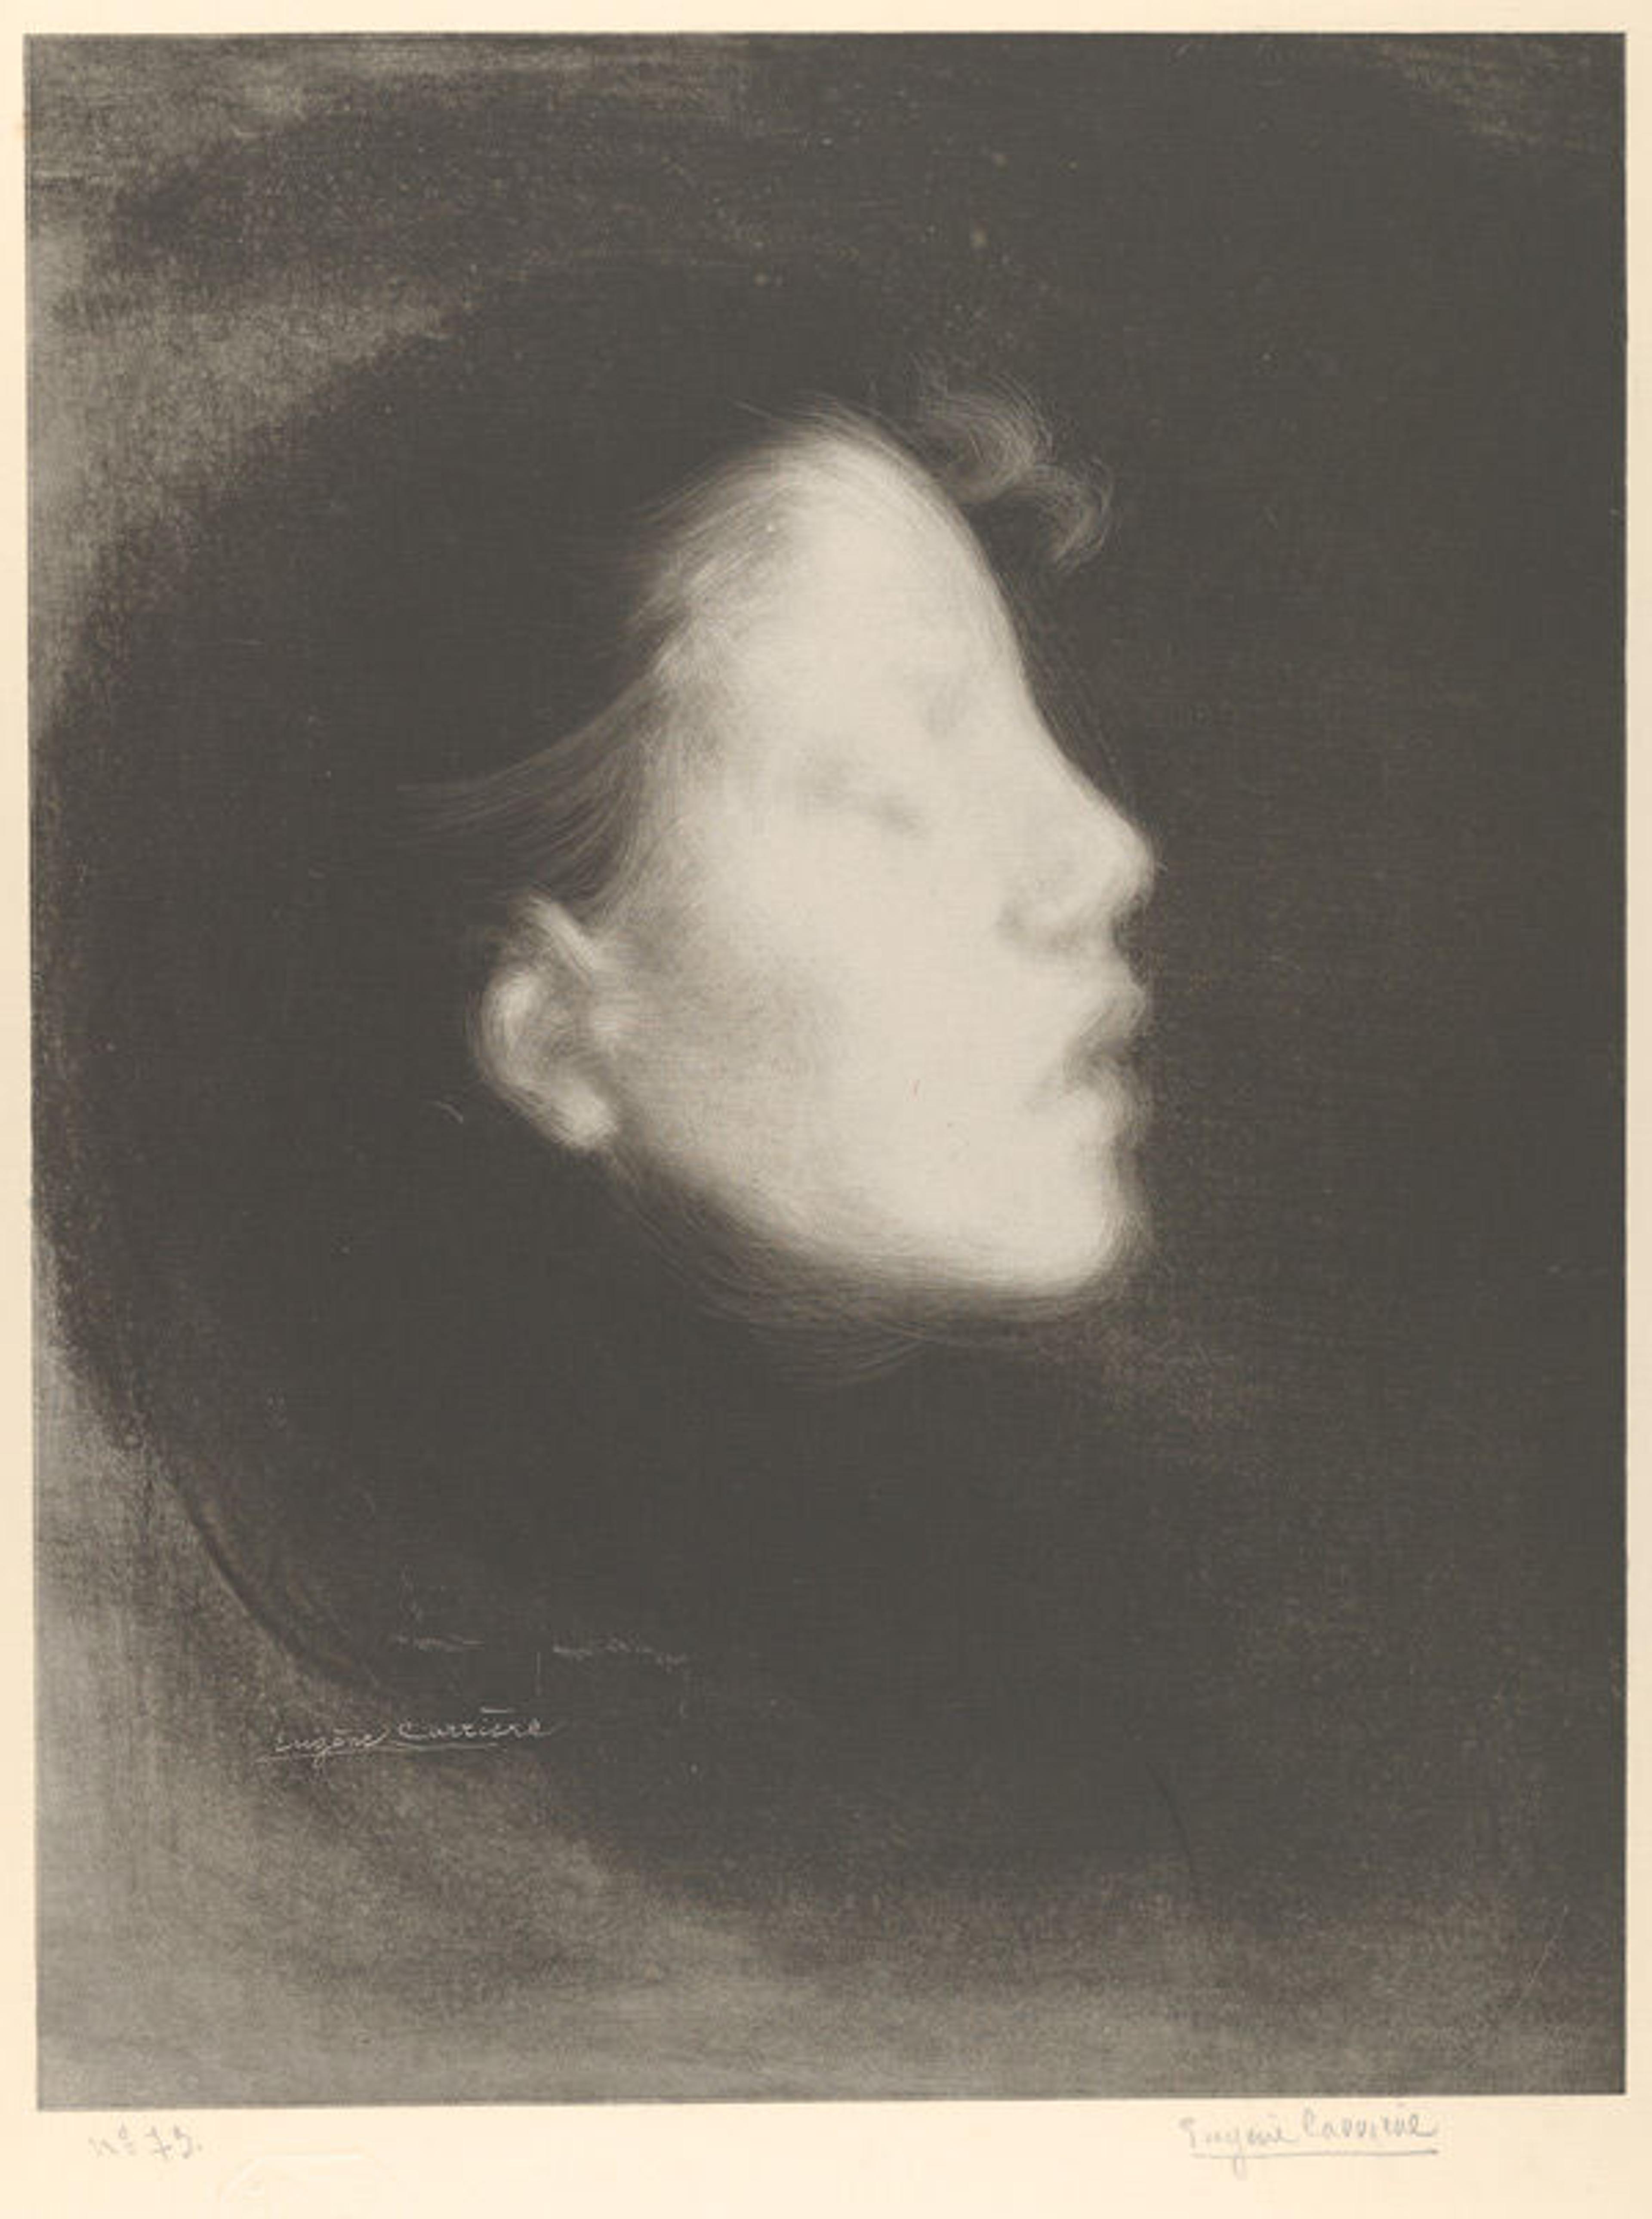 Head of a Woman (from L'Estampe originale, Album IX), 1895. Eugène Carrière (French, 1849–1906). Publisher André Marty (French, born 1857). Lithograph; Image: 18 5/16 × 14 1/16 in. (46.5 × 35.7 cm). Sheet: 23 5/8 × 16 7/8 in. (60 × 42.9 cm). The Metropolitan Museum of Art, New York, Rogers Fund, 1922 (22.82.1-83)